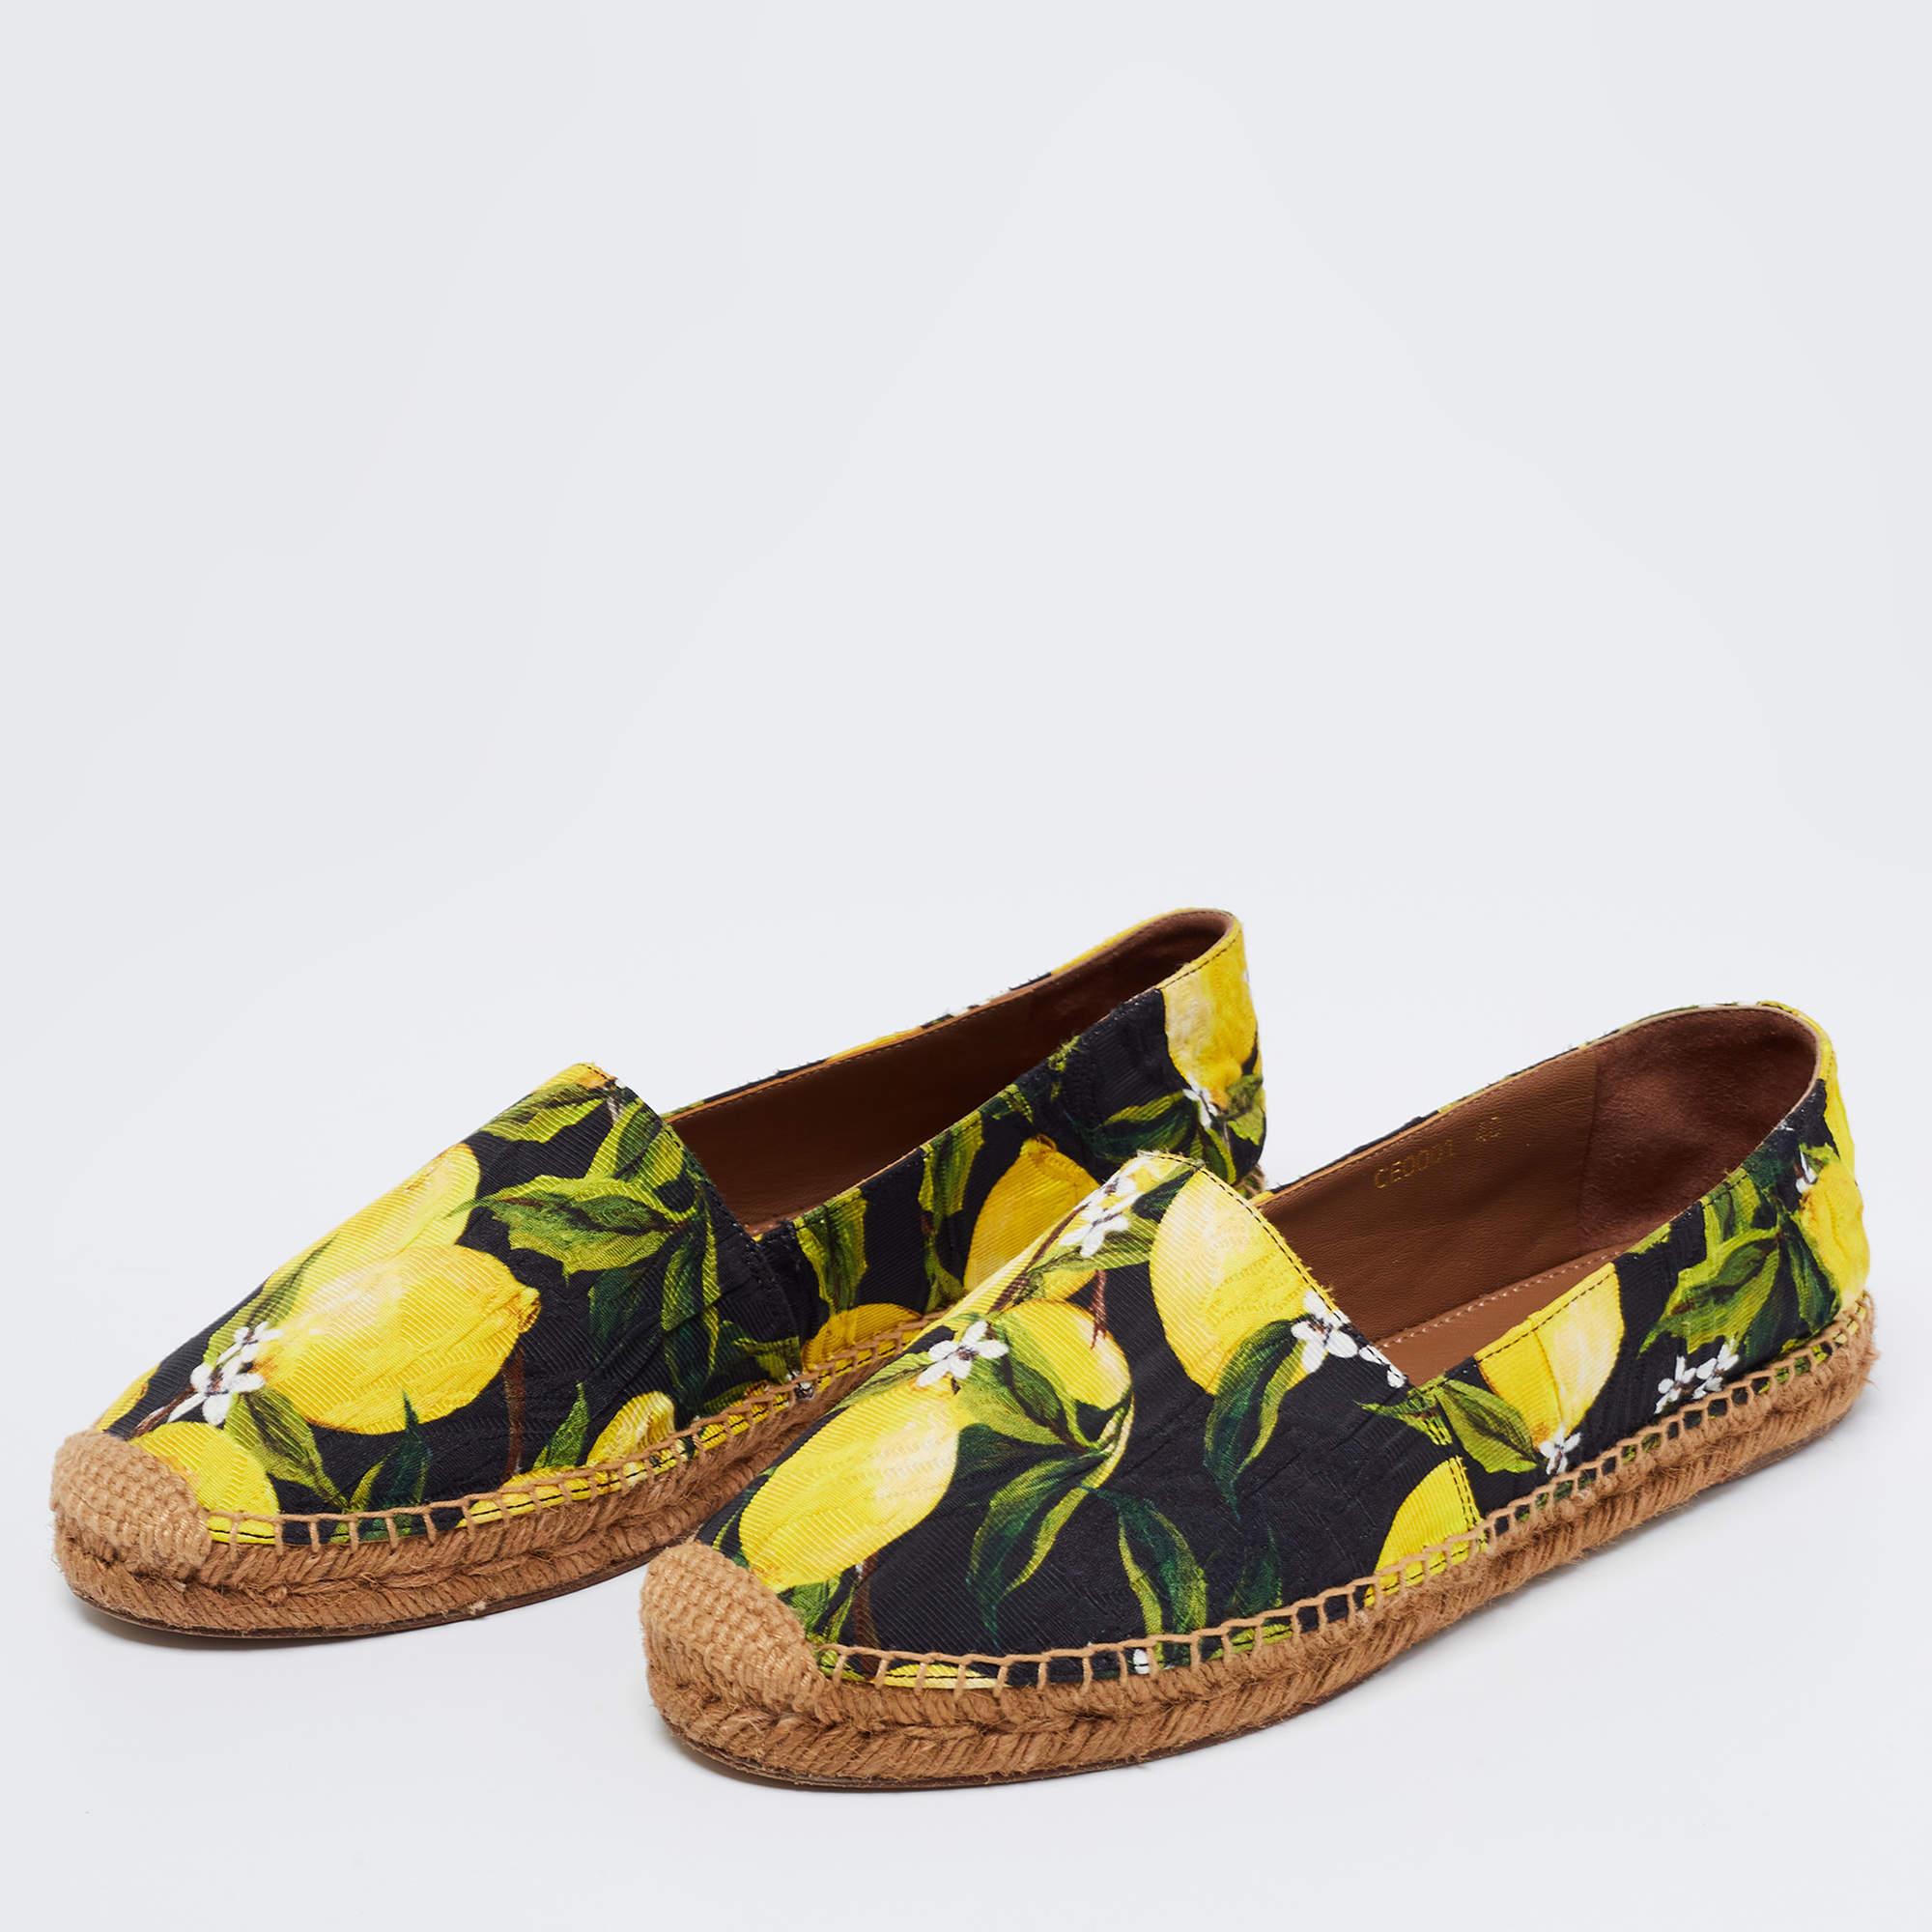 Step out in style this summer with these vibrant espadrilles from Dolce & Gabbana. Featuring lemon prints on the fabric exterior, this trendy round-toe pair has braided espadrille detailing. Soak up the sun by slipping these on with shorts or pastel